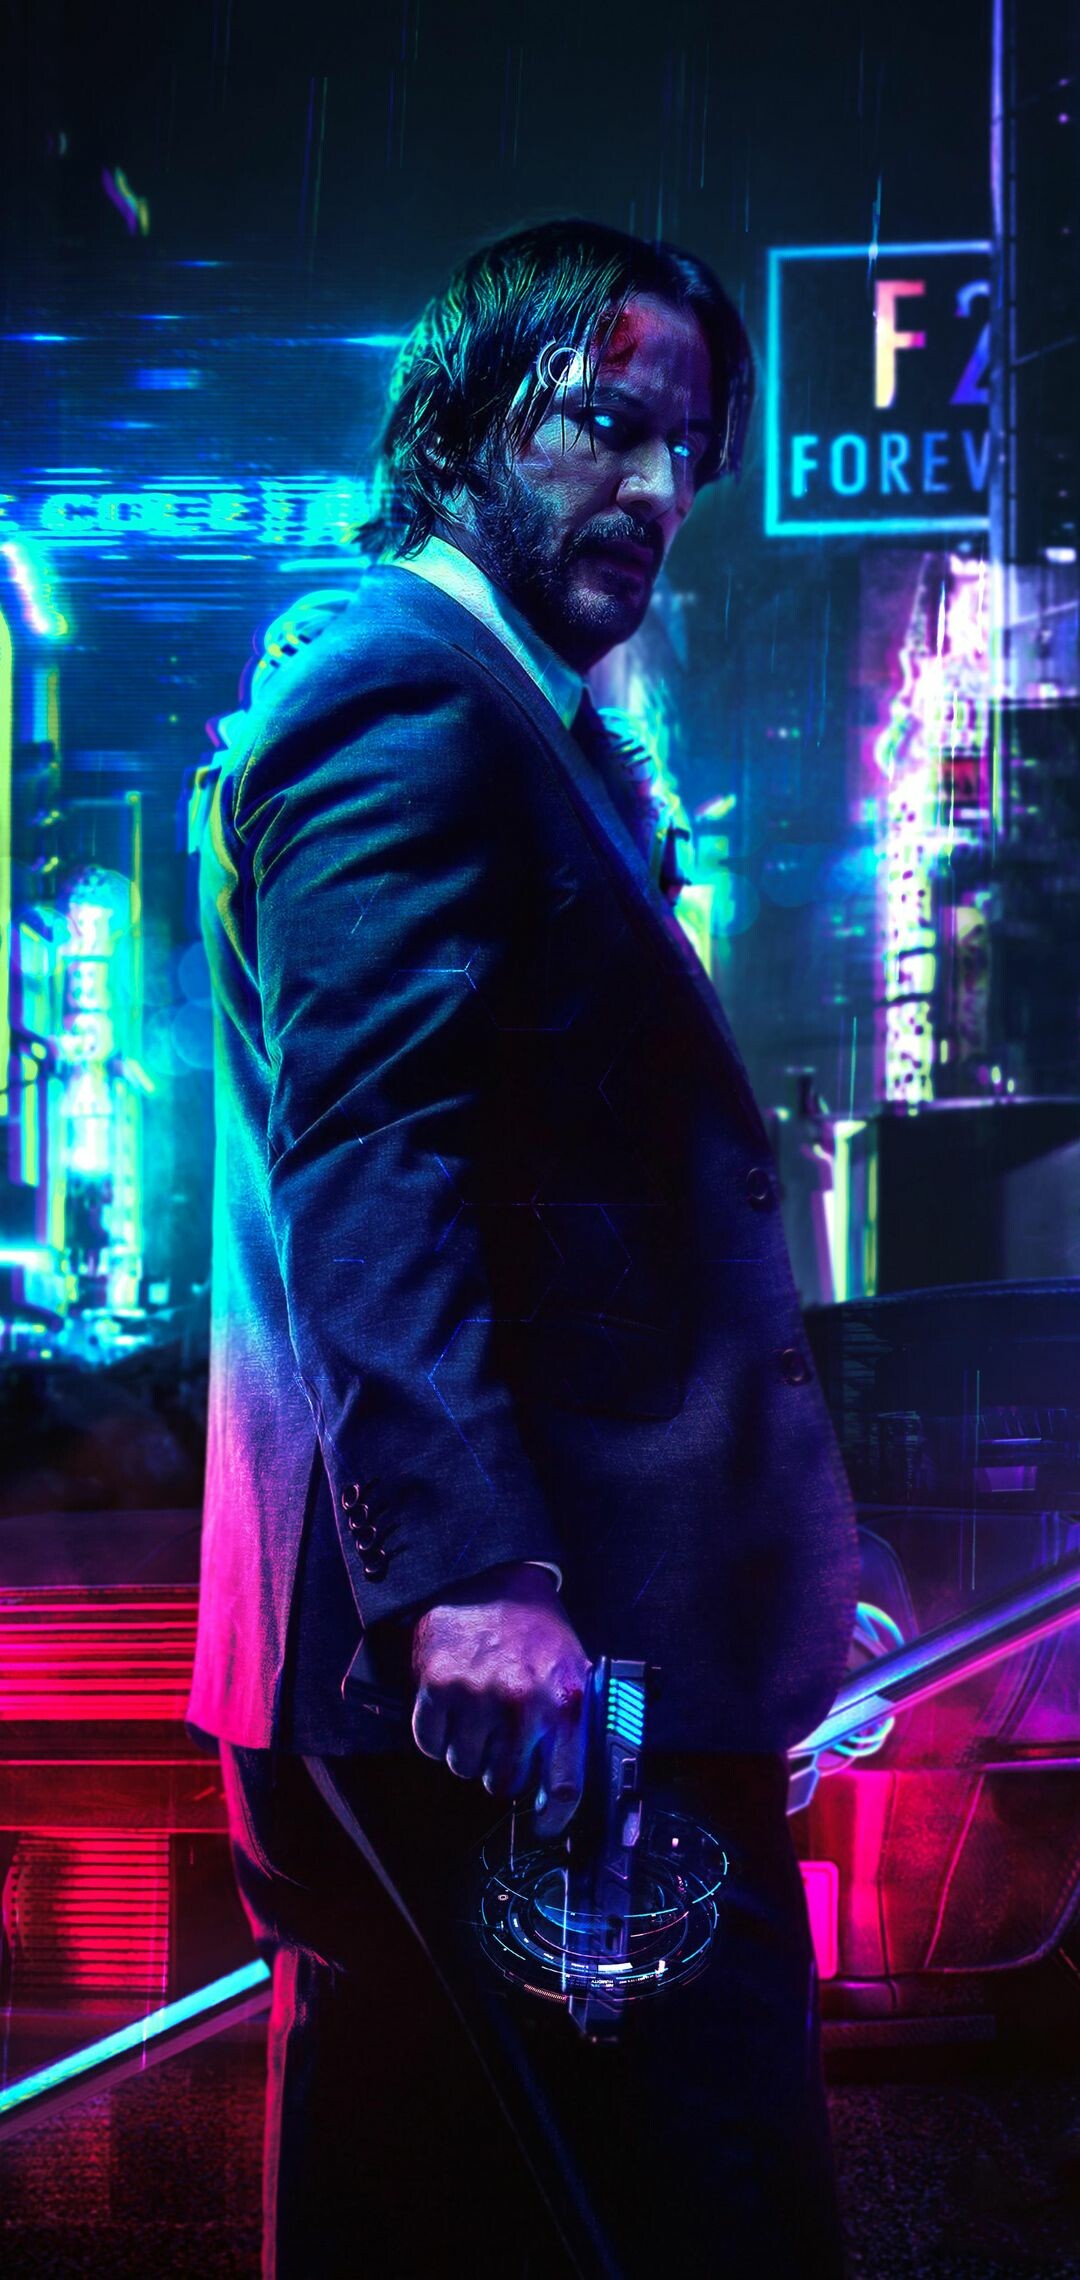 Cyberpunk 2077: Keanu Reeves, "The Hand" is Johnny Silverhand's "cyberpsycho expression", who blames all of his horrible acts on the cyberarm. 1080x2280 HD Wallpaper.